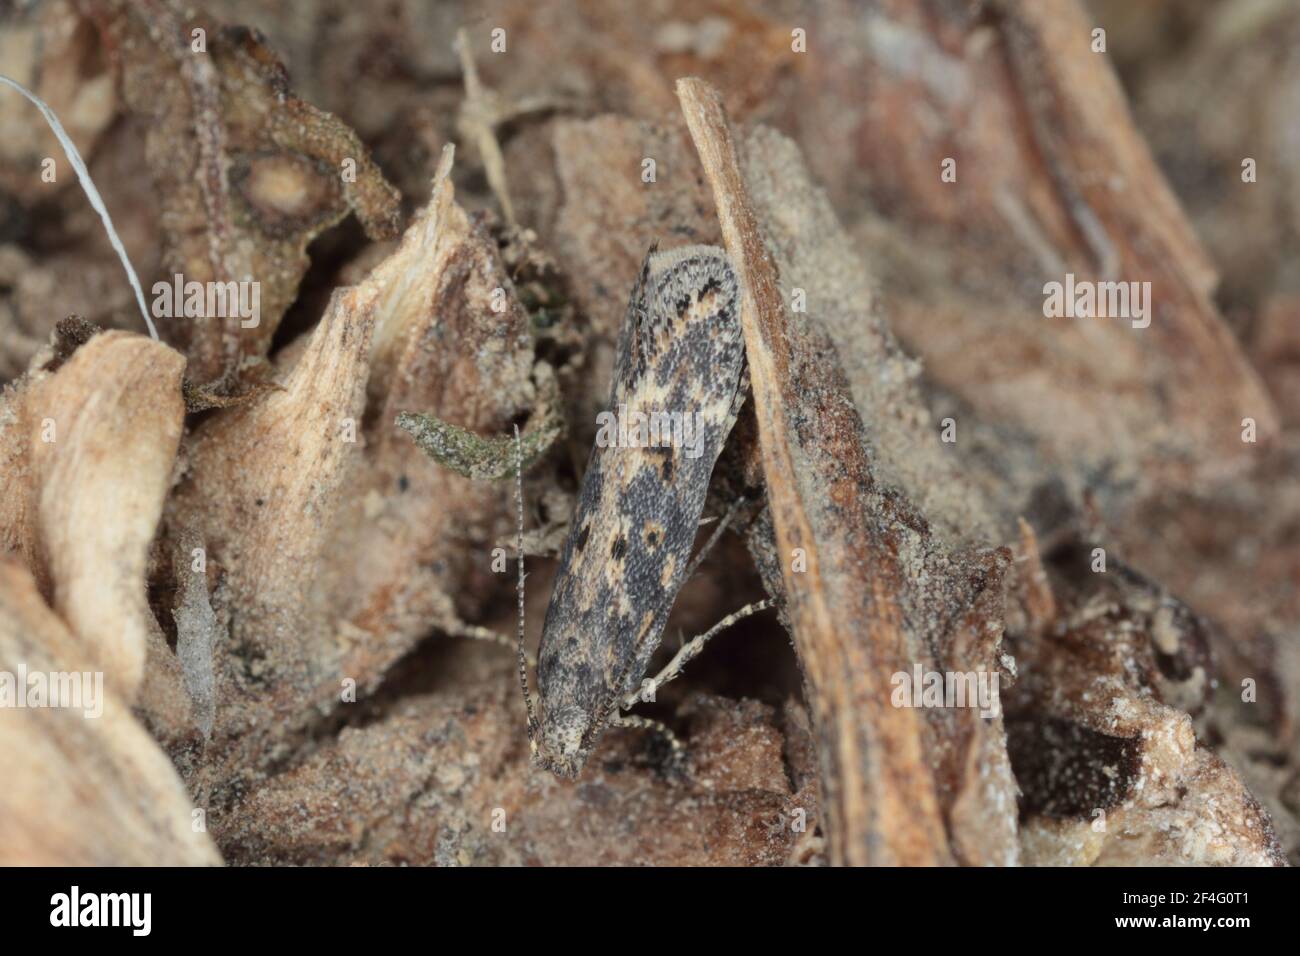 Moth of the beet moth Scrobipalpa ocellatella, is a species in the family Gelechiidae. This is an important pest of sugar beet and other crops. Stock Photo